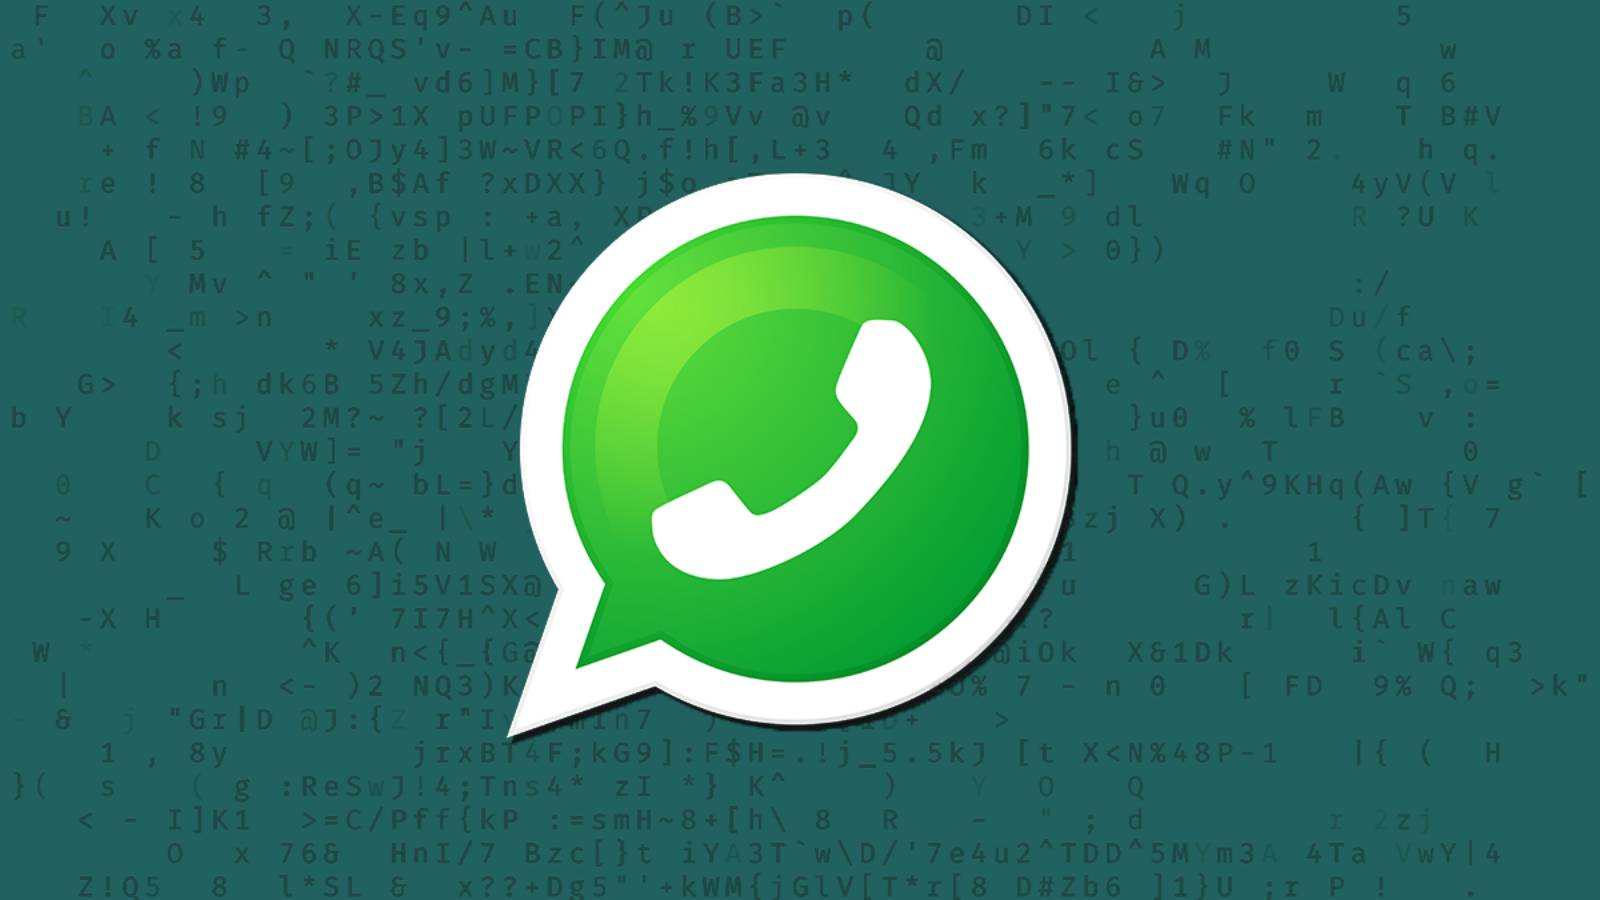 Notification WhatsApp Changements majeurs iPhone Android 2022